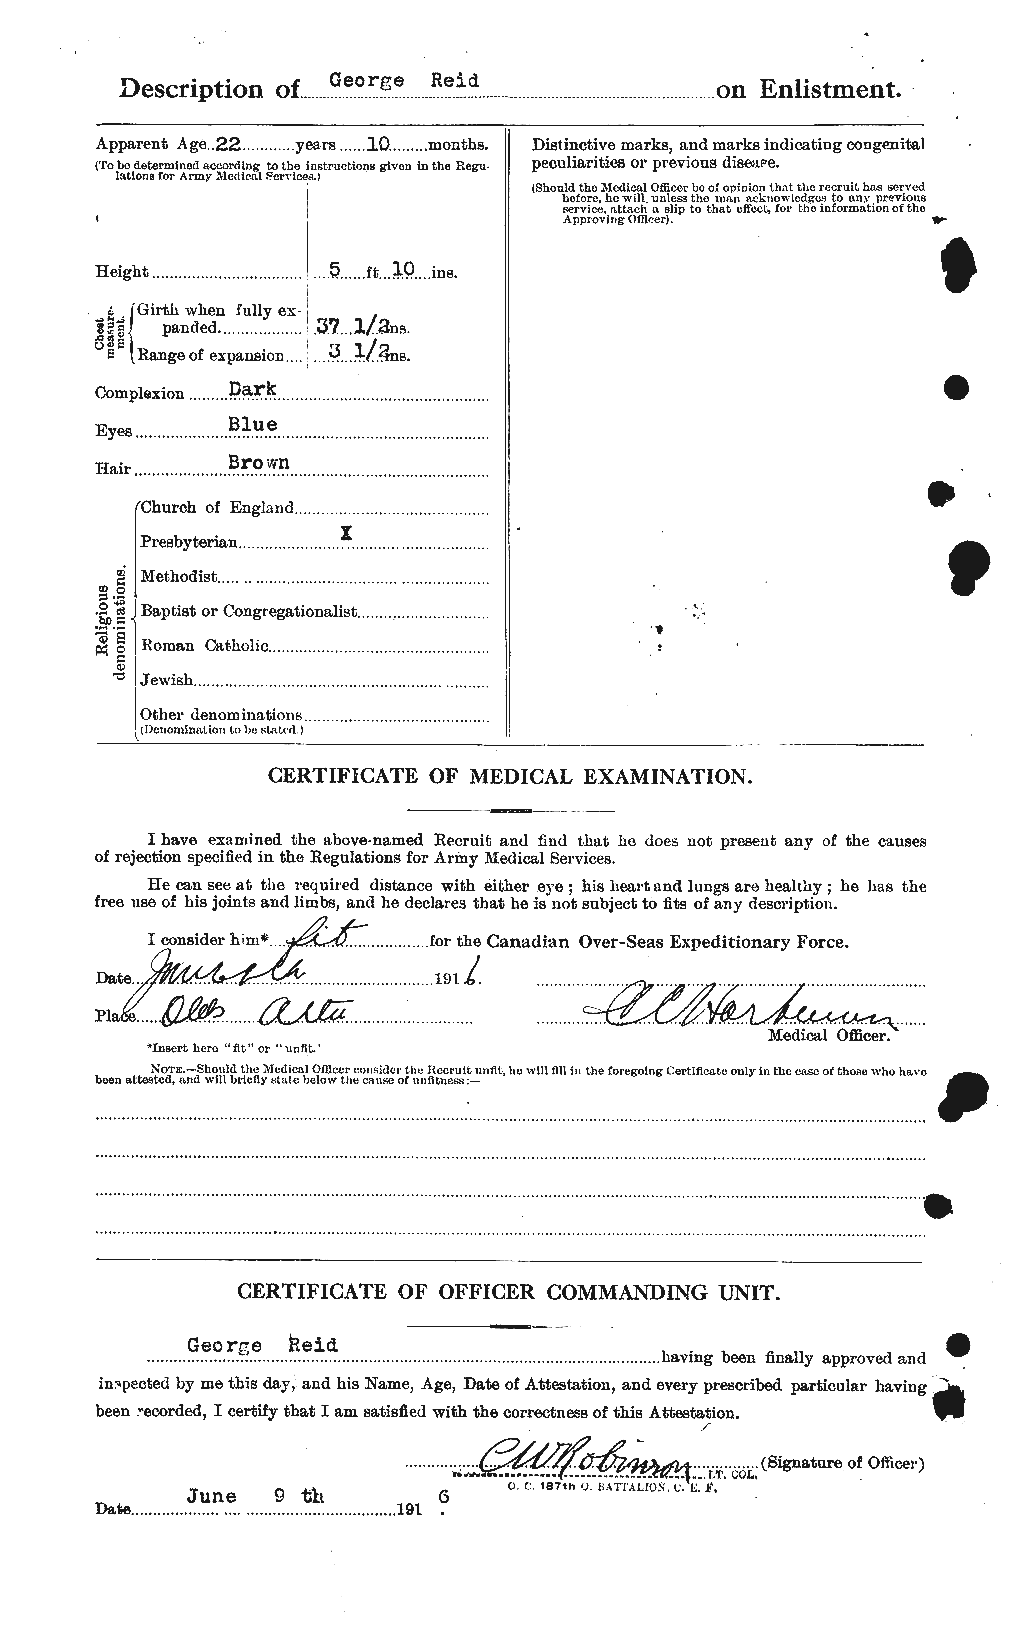 Personnel Records of the First World War - CEF 596277b